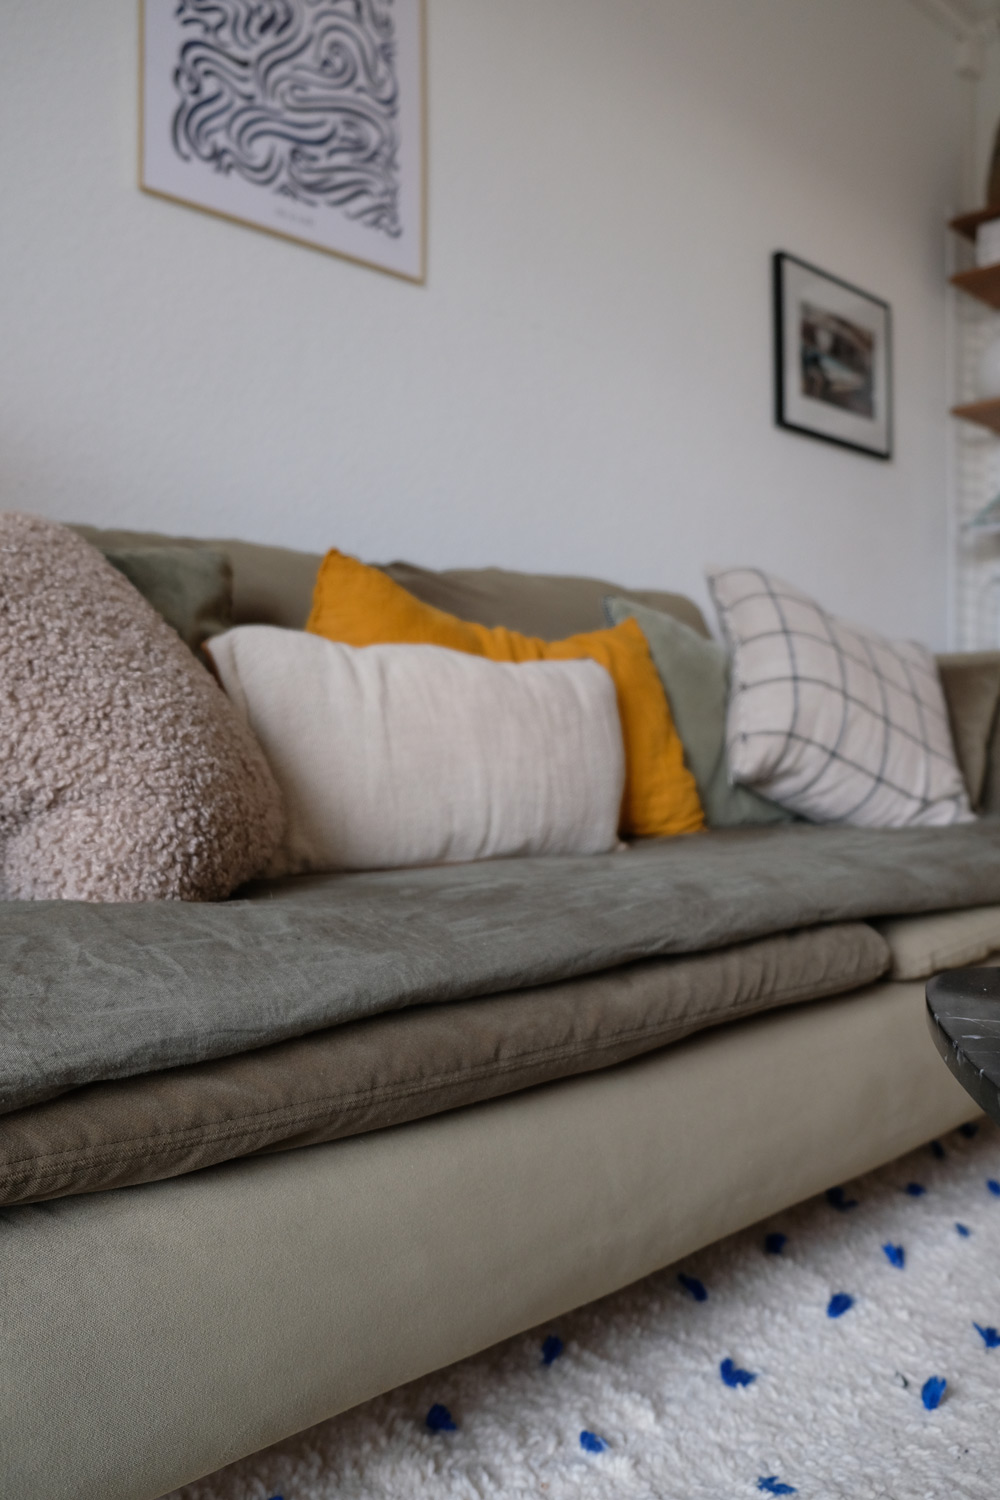 How I Used This French Trick to Make my IKEA Söderhamn Sofa More Comfortable